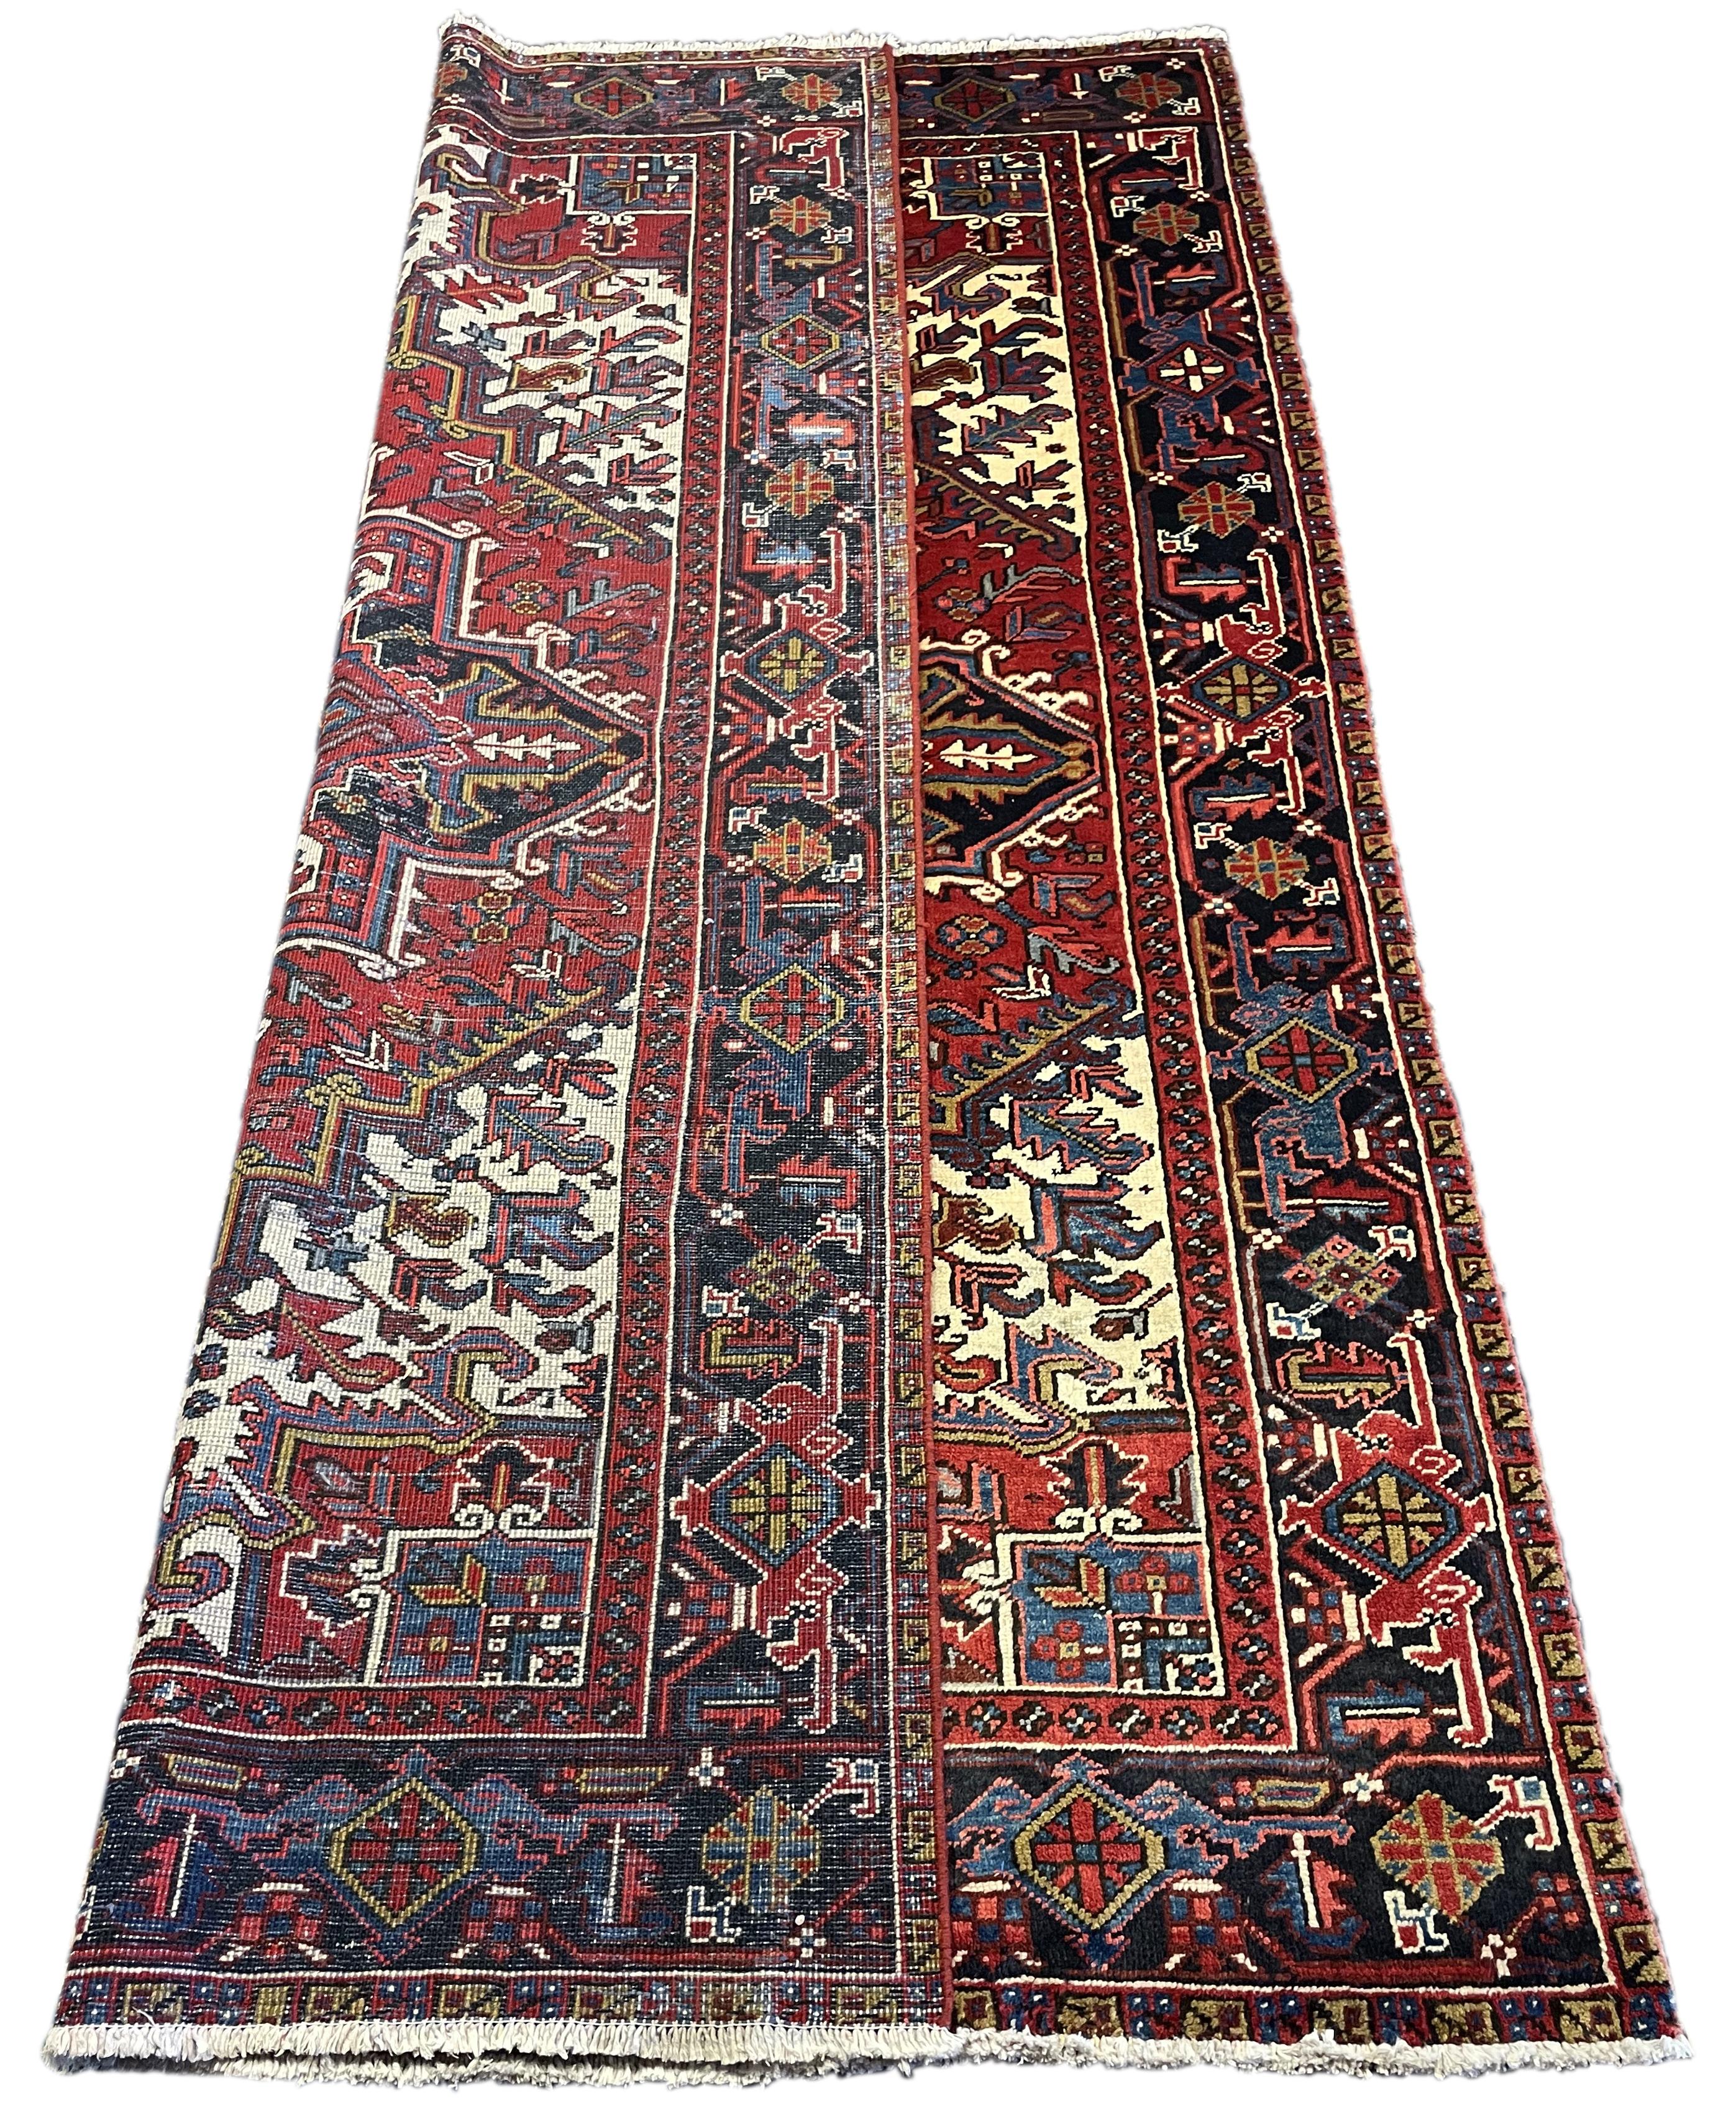 Immaculate 60's Persian Heriz. The Heriz is the most popular oriental rug in the world and it is easy to see why! The design is so popular and attractive that countries all over the world try to recreate these pieces. All of our Heriz's were woven